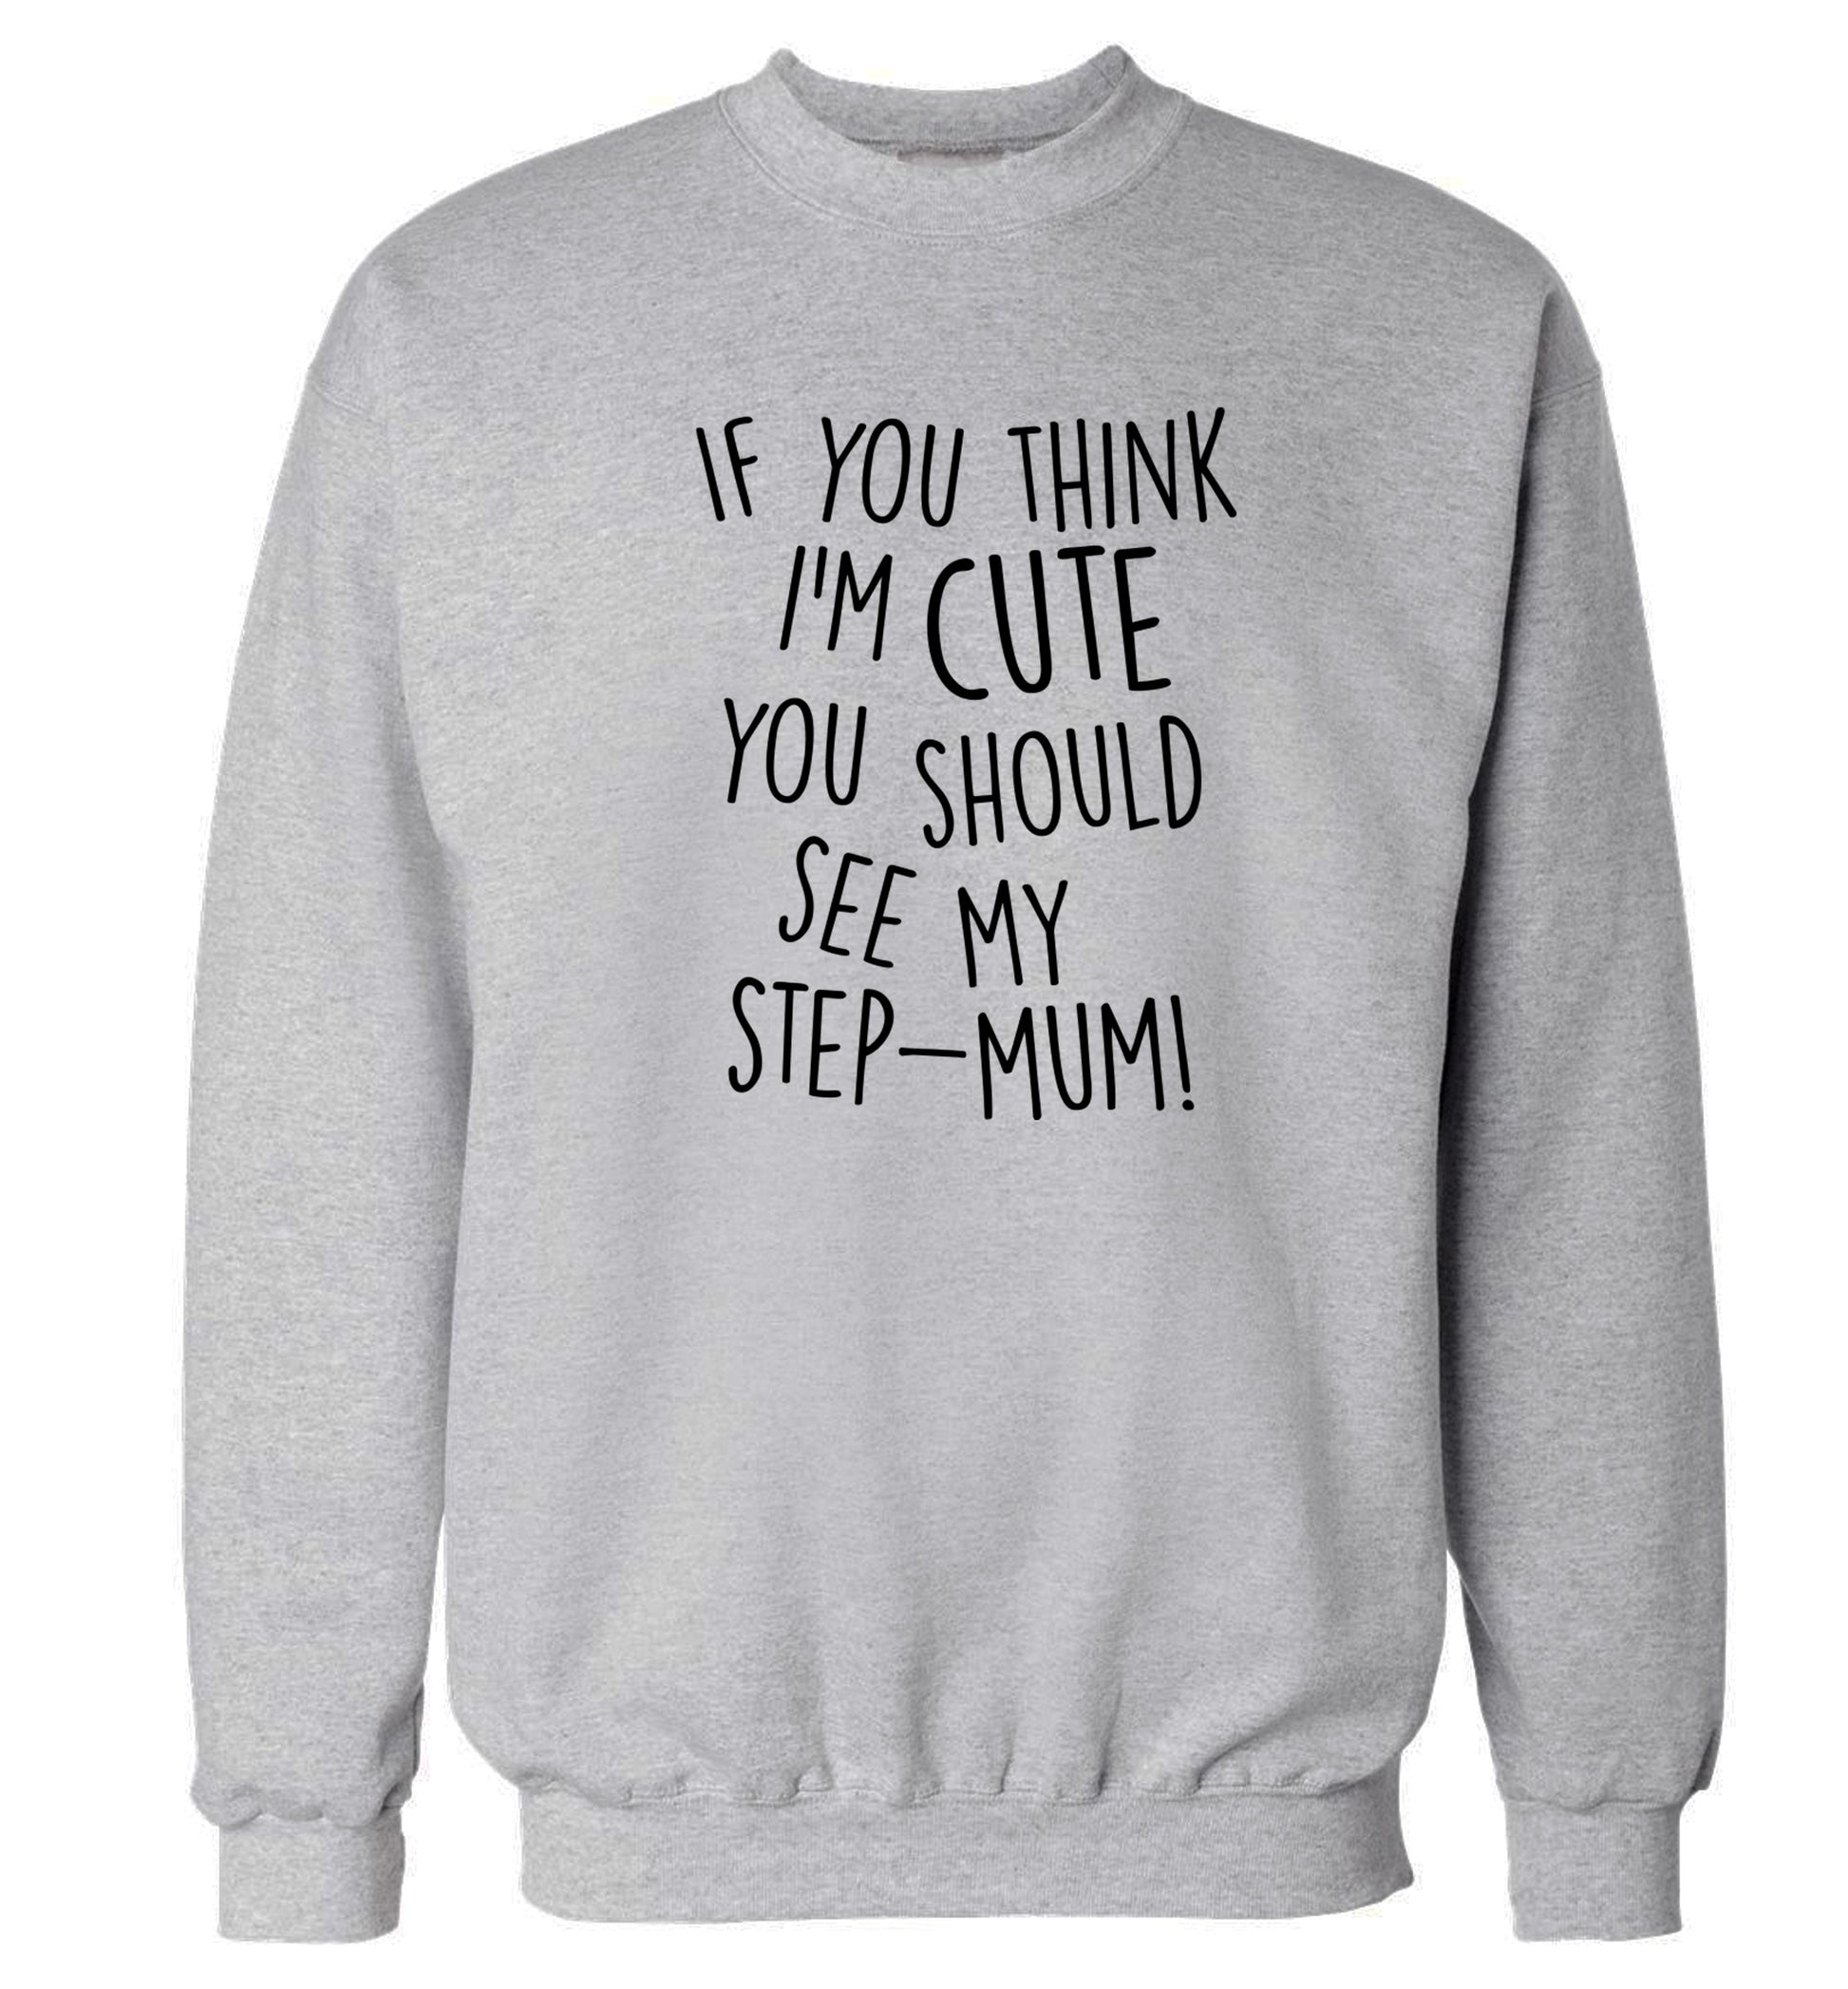 If you think I'm cute you should see my step-mum Adult's unisex grey Sweater 2XL